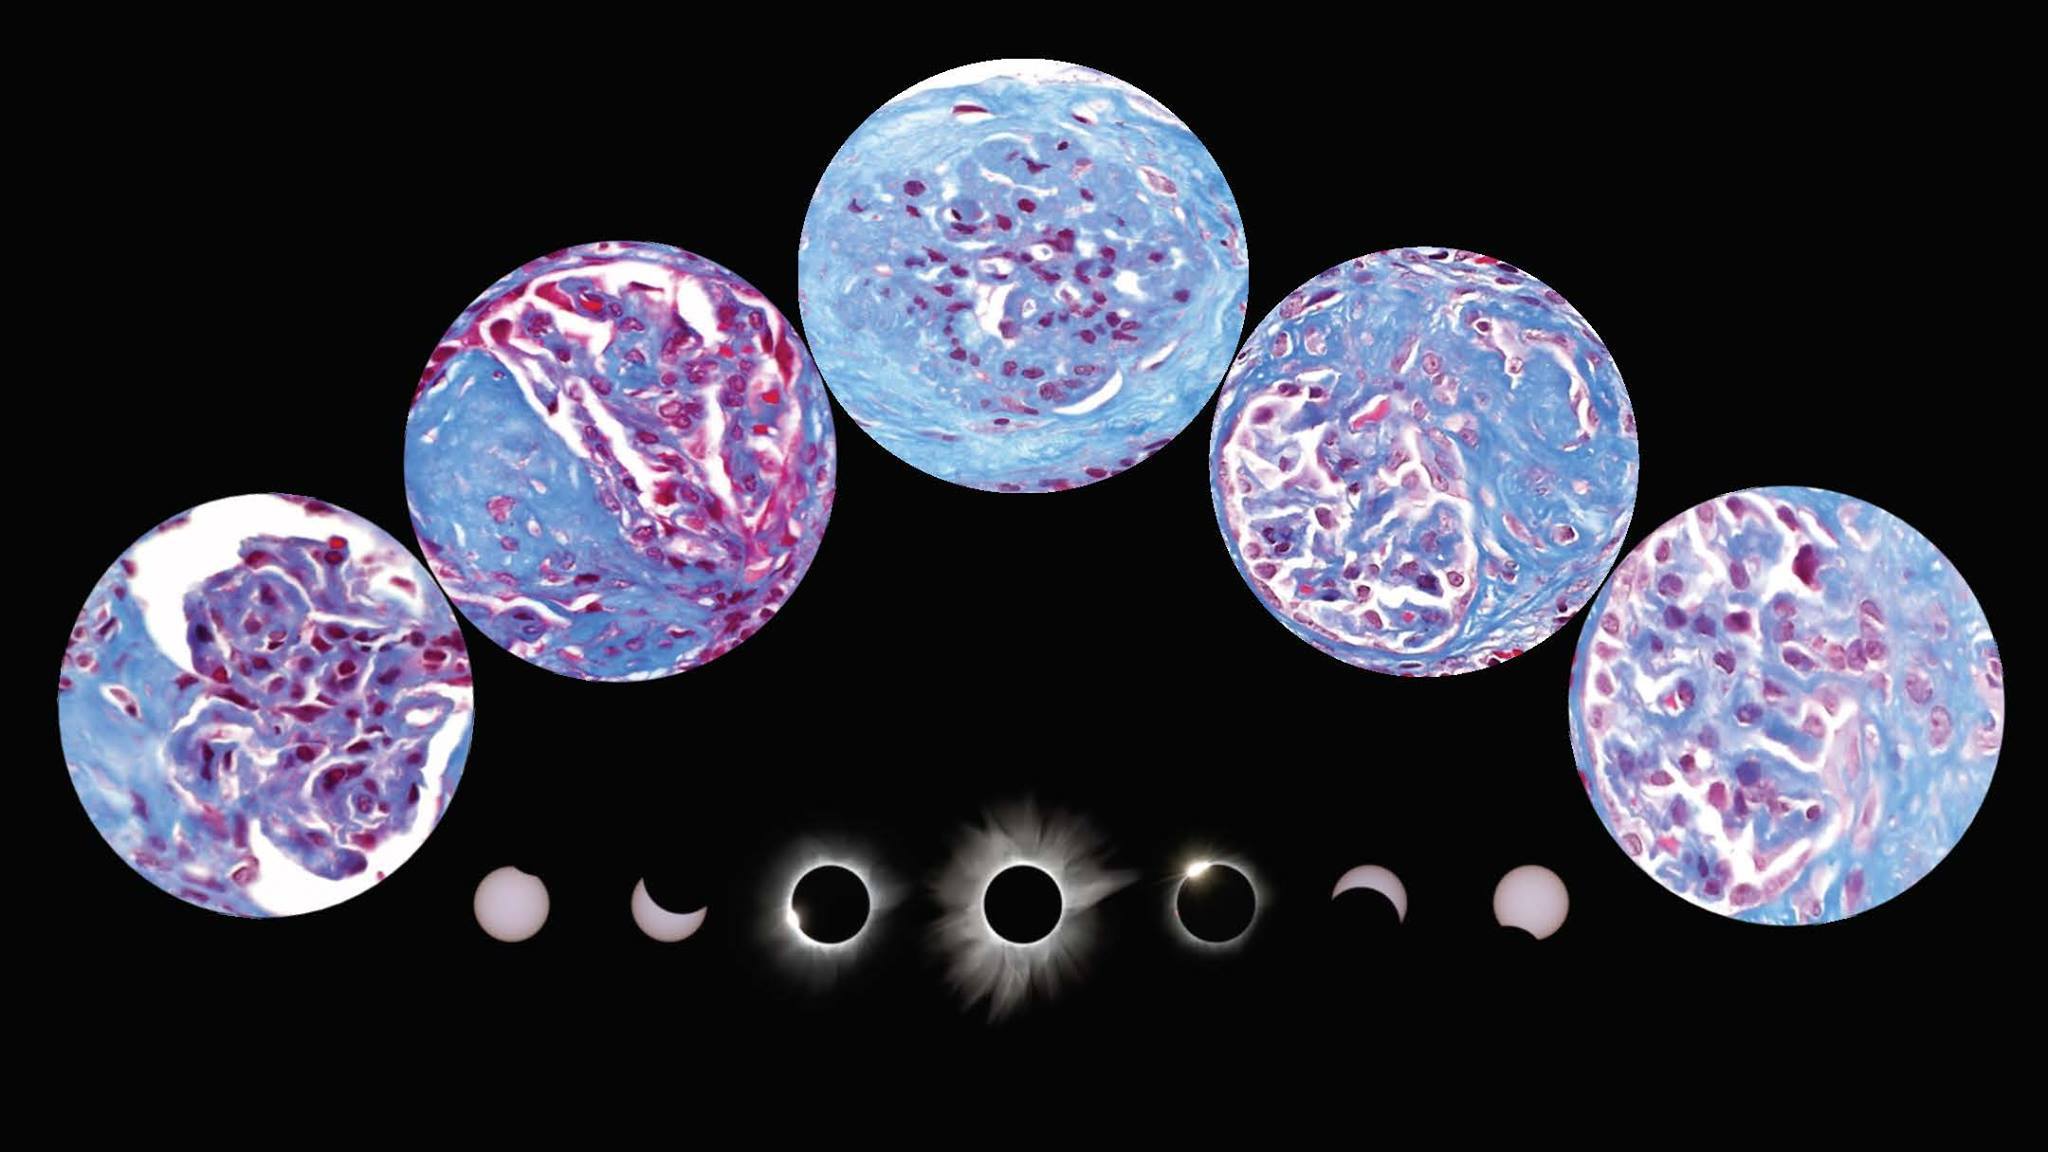 An Eclipse Under the Scope: A Renal Pathologist’s View